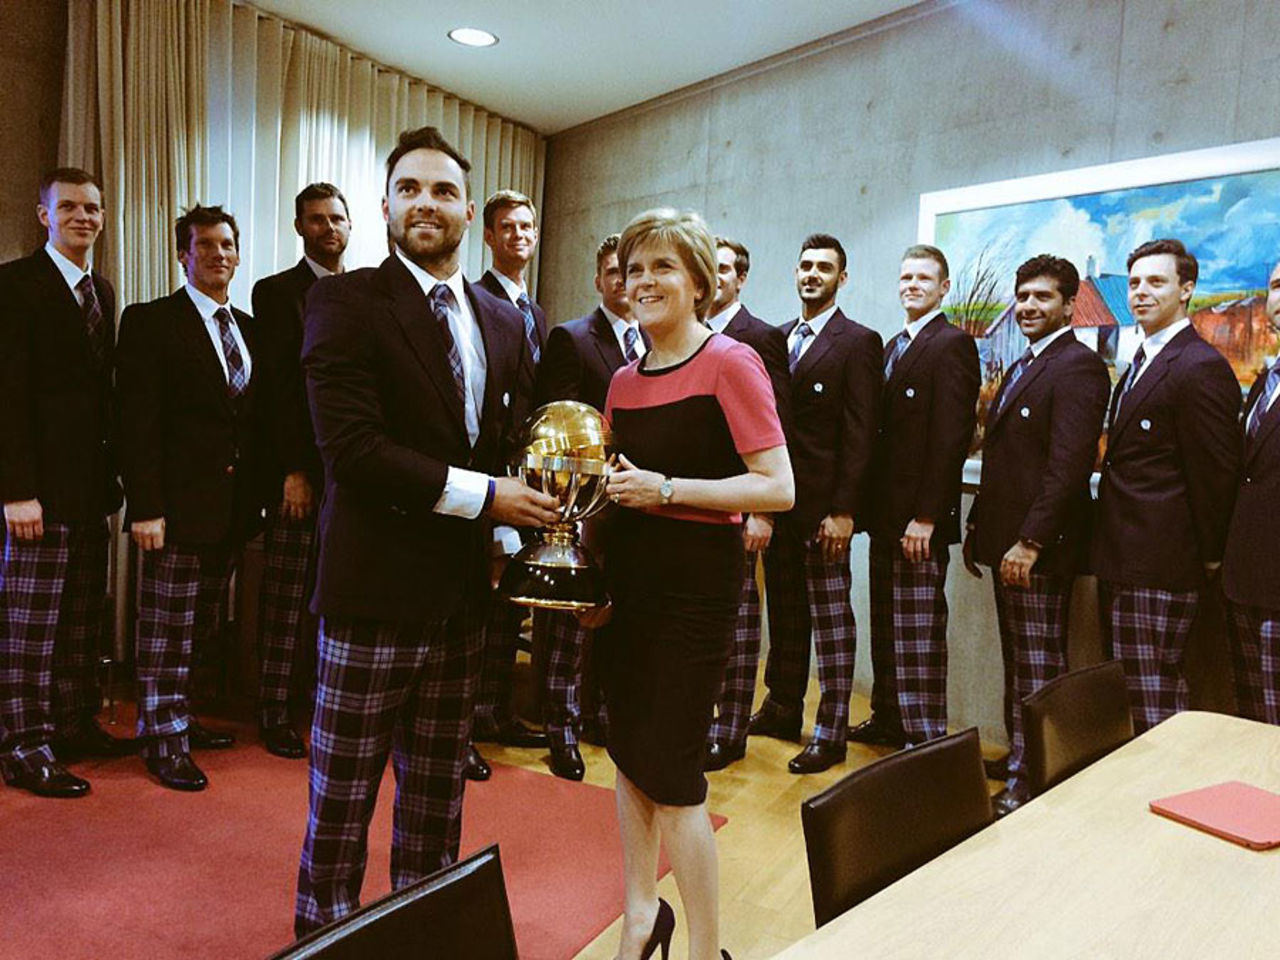 The Scotland World Cup squad, suitably attired in tartan trousers, meet Nicola Sturgeon, Scotland's First Minister ahead of leaving for Australia and New Zealand, before departing for the World Cup, January 29, 2015